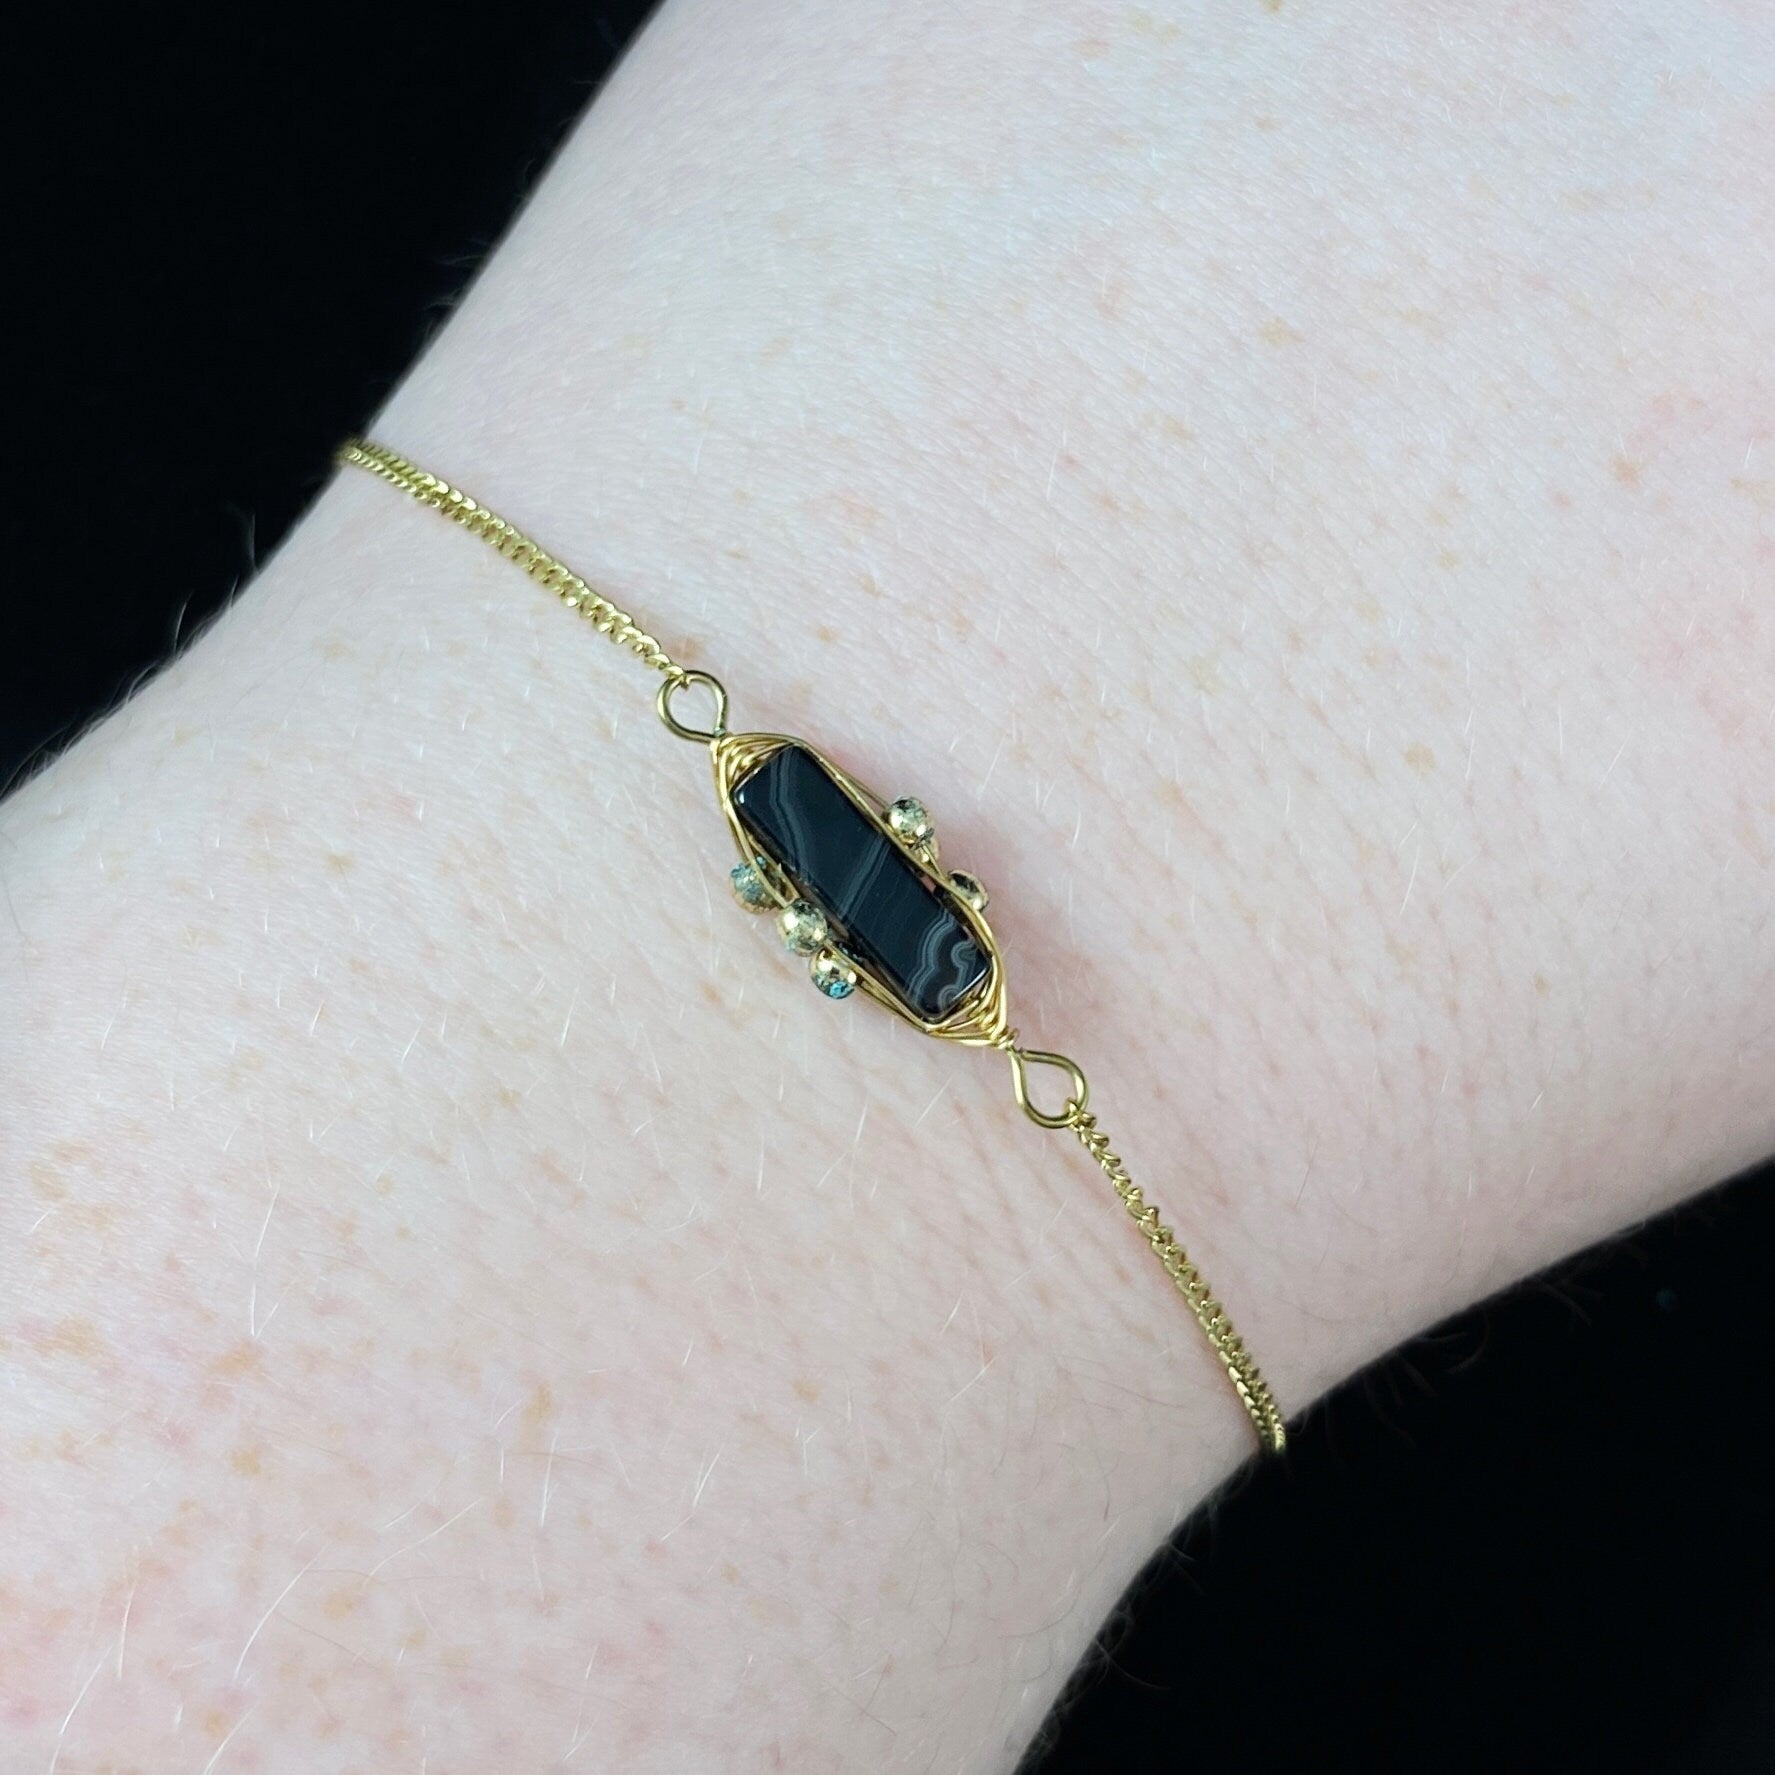 Black Rectangle Natural Stone Bracelet with Gold Chain Band and Wire Wrapped Setting